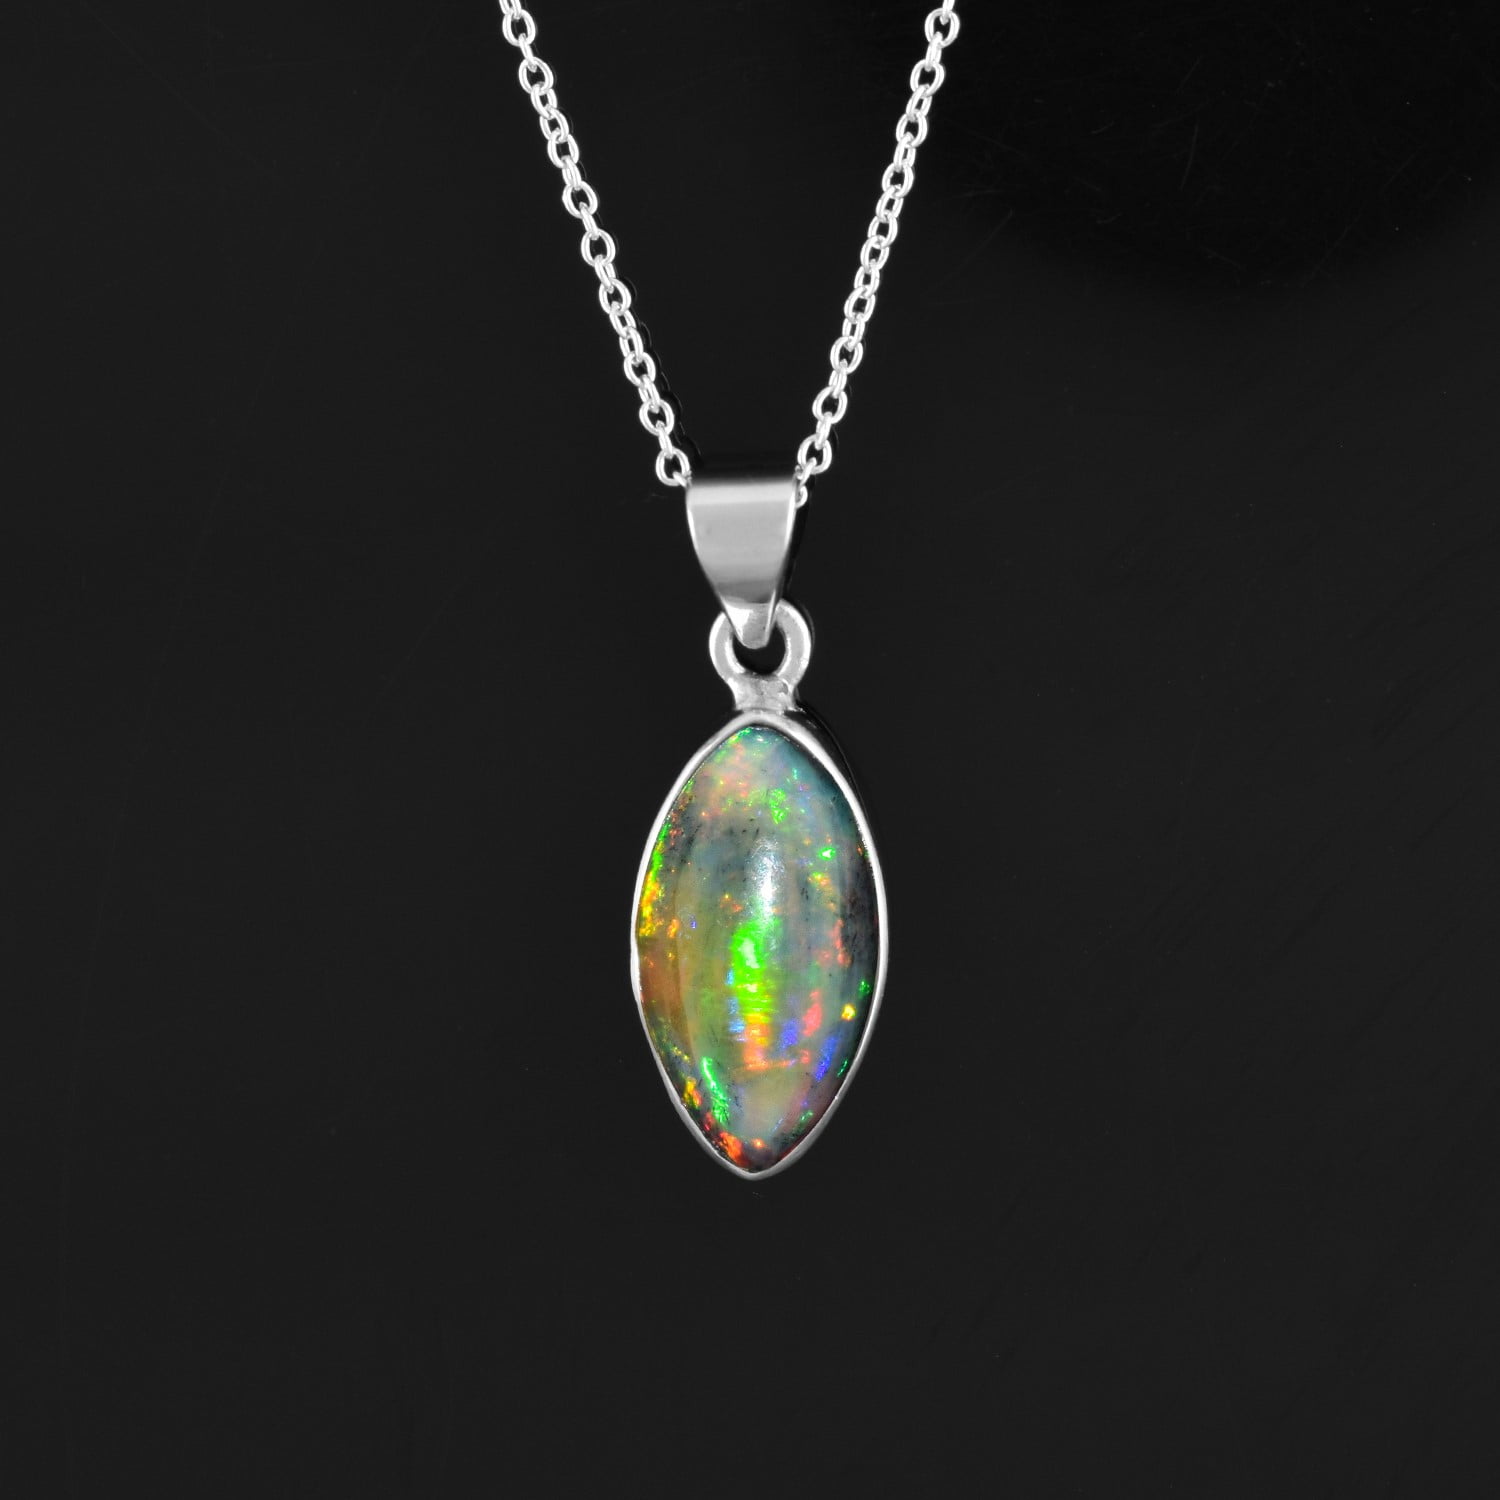 Healing Opal Necklace Gift For Girlfriend Black Tumble opal Necklace Natural Ethiopian Opal Tumble Beaded Necklace October Necklace